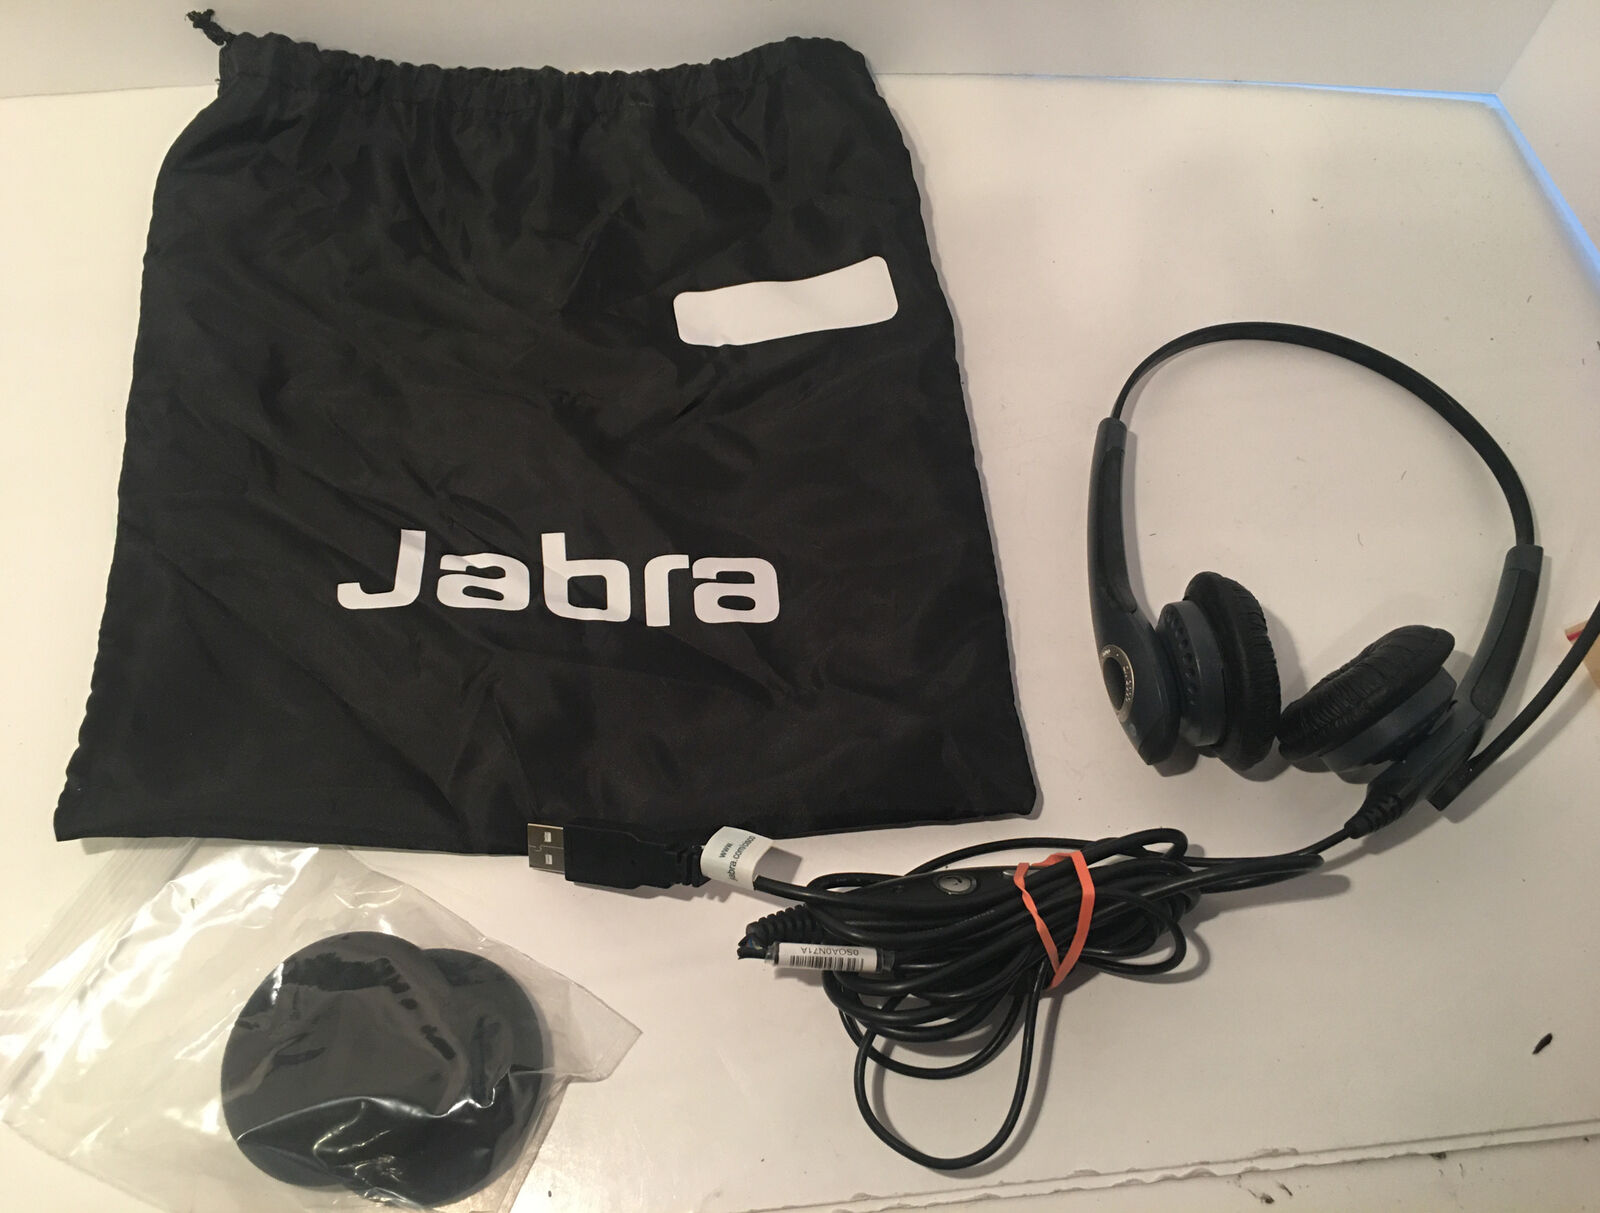 Outlet sale feature Jabra GN2000 MS DUO Black Headband Headset Extra + C Ear Super beauty product restock quality top And Bag